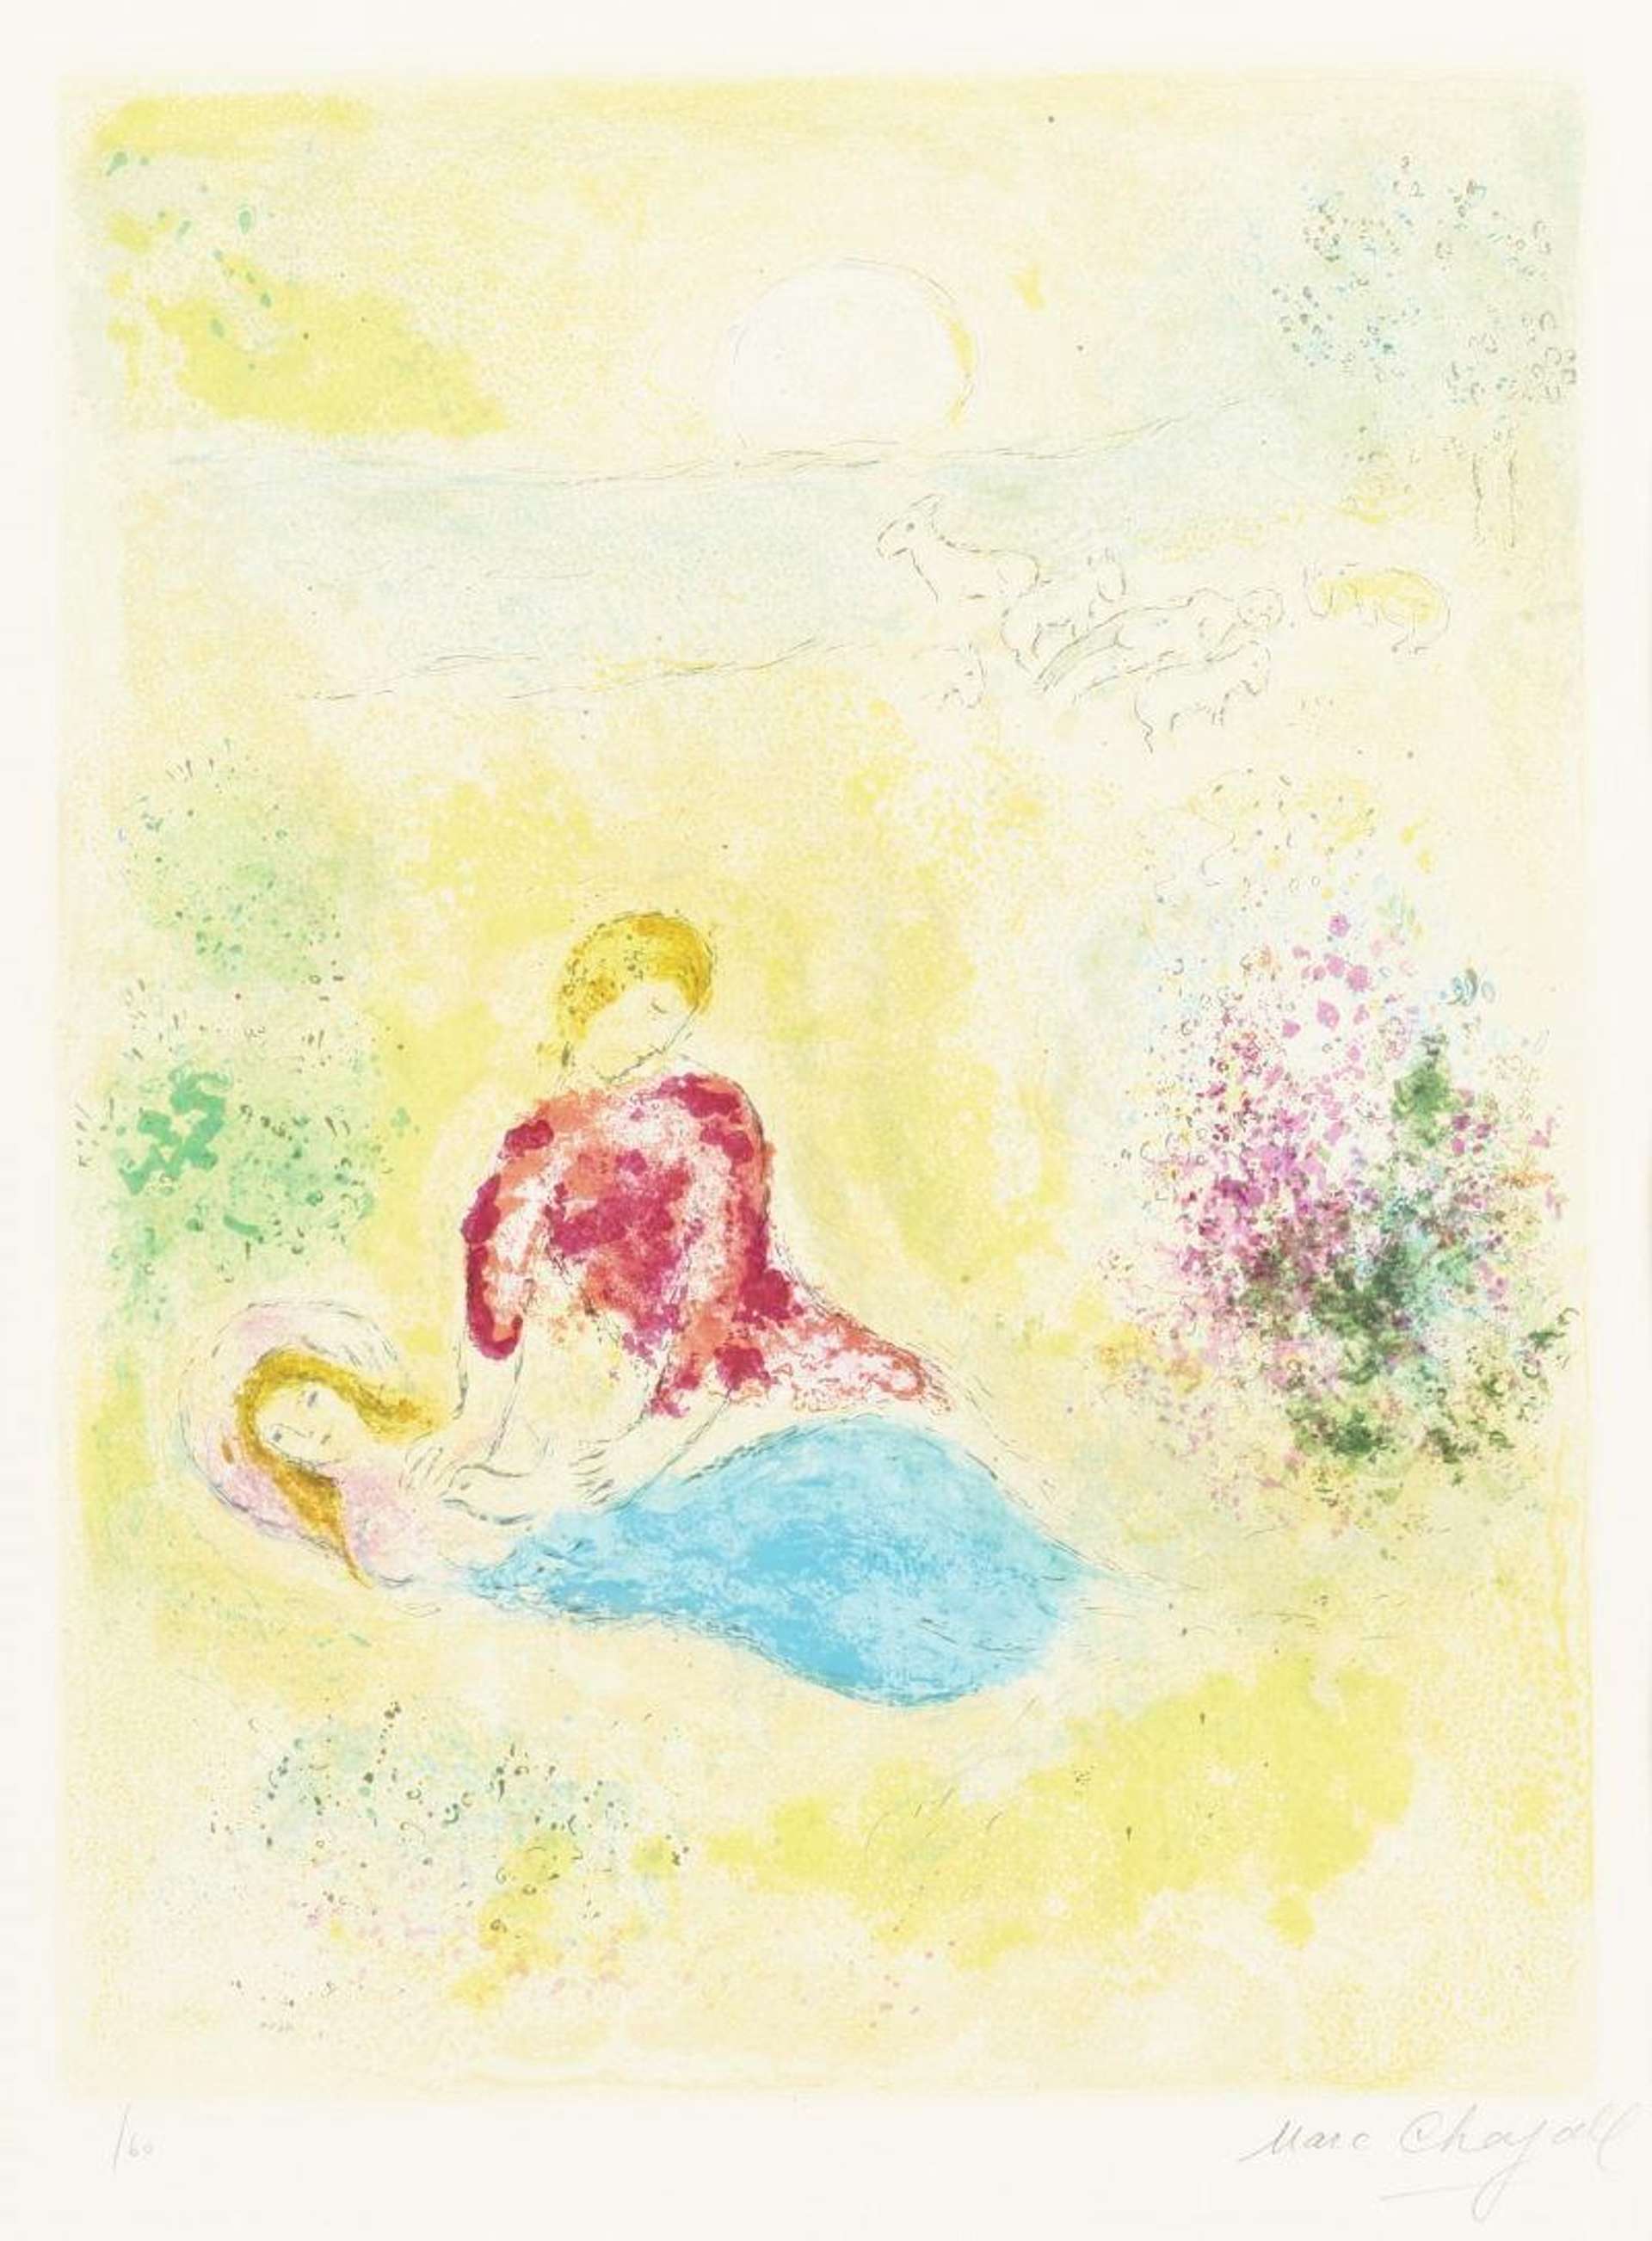 The Little Swallow - Signed Print by Marc Chagall 1960 - MyArtBroker